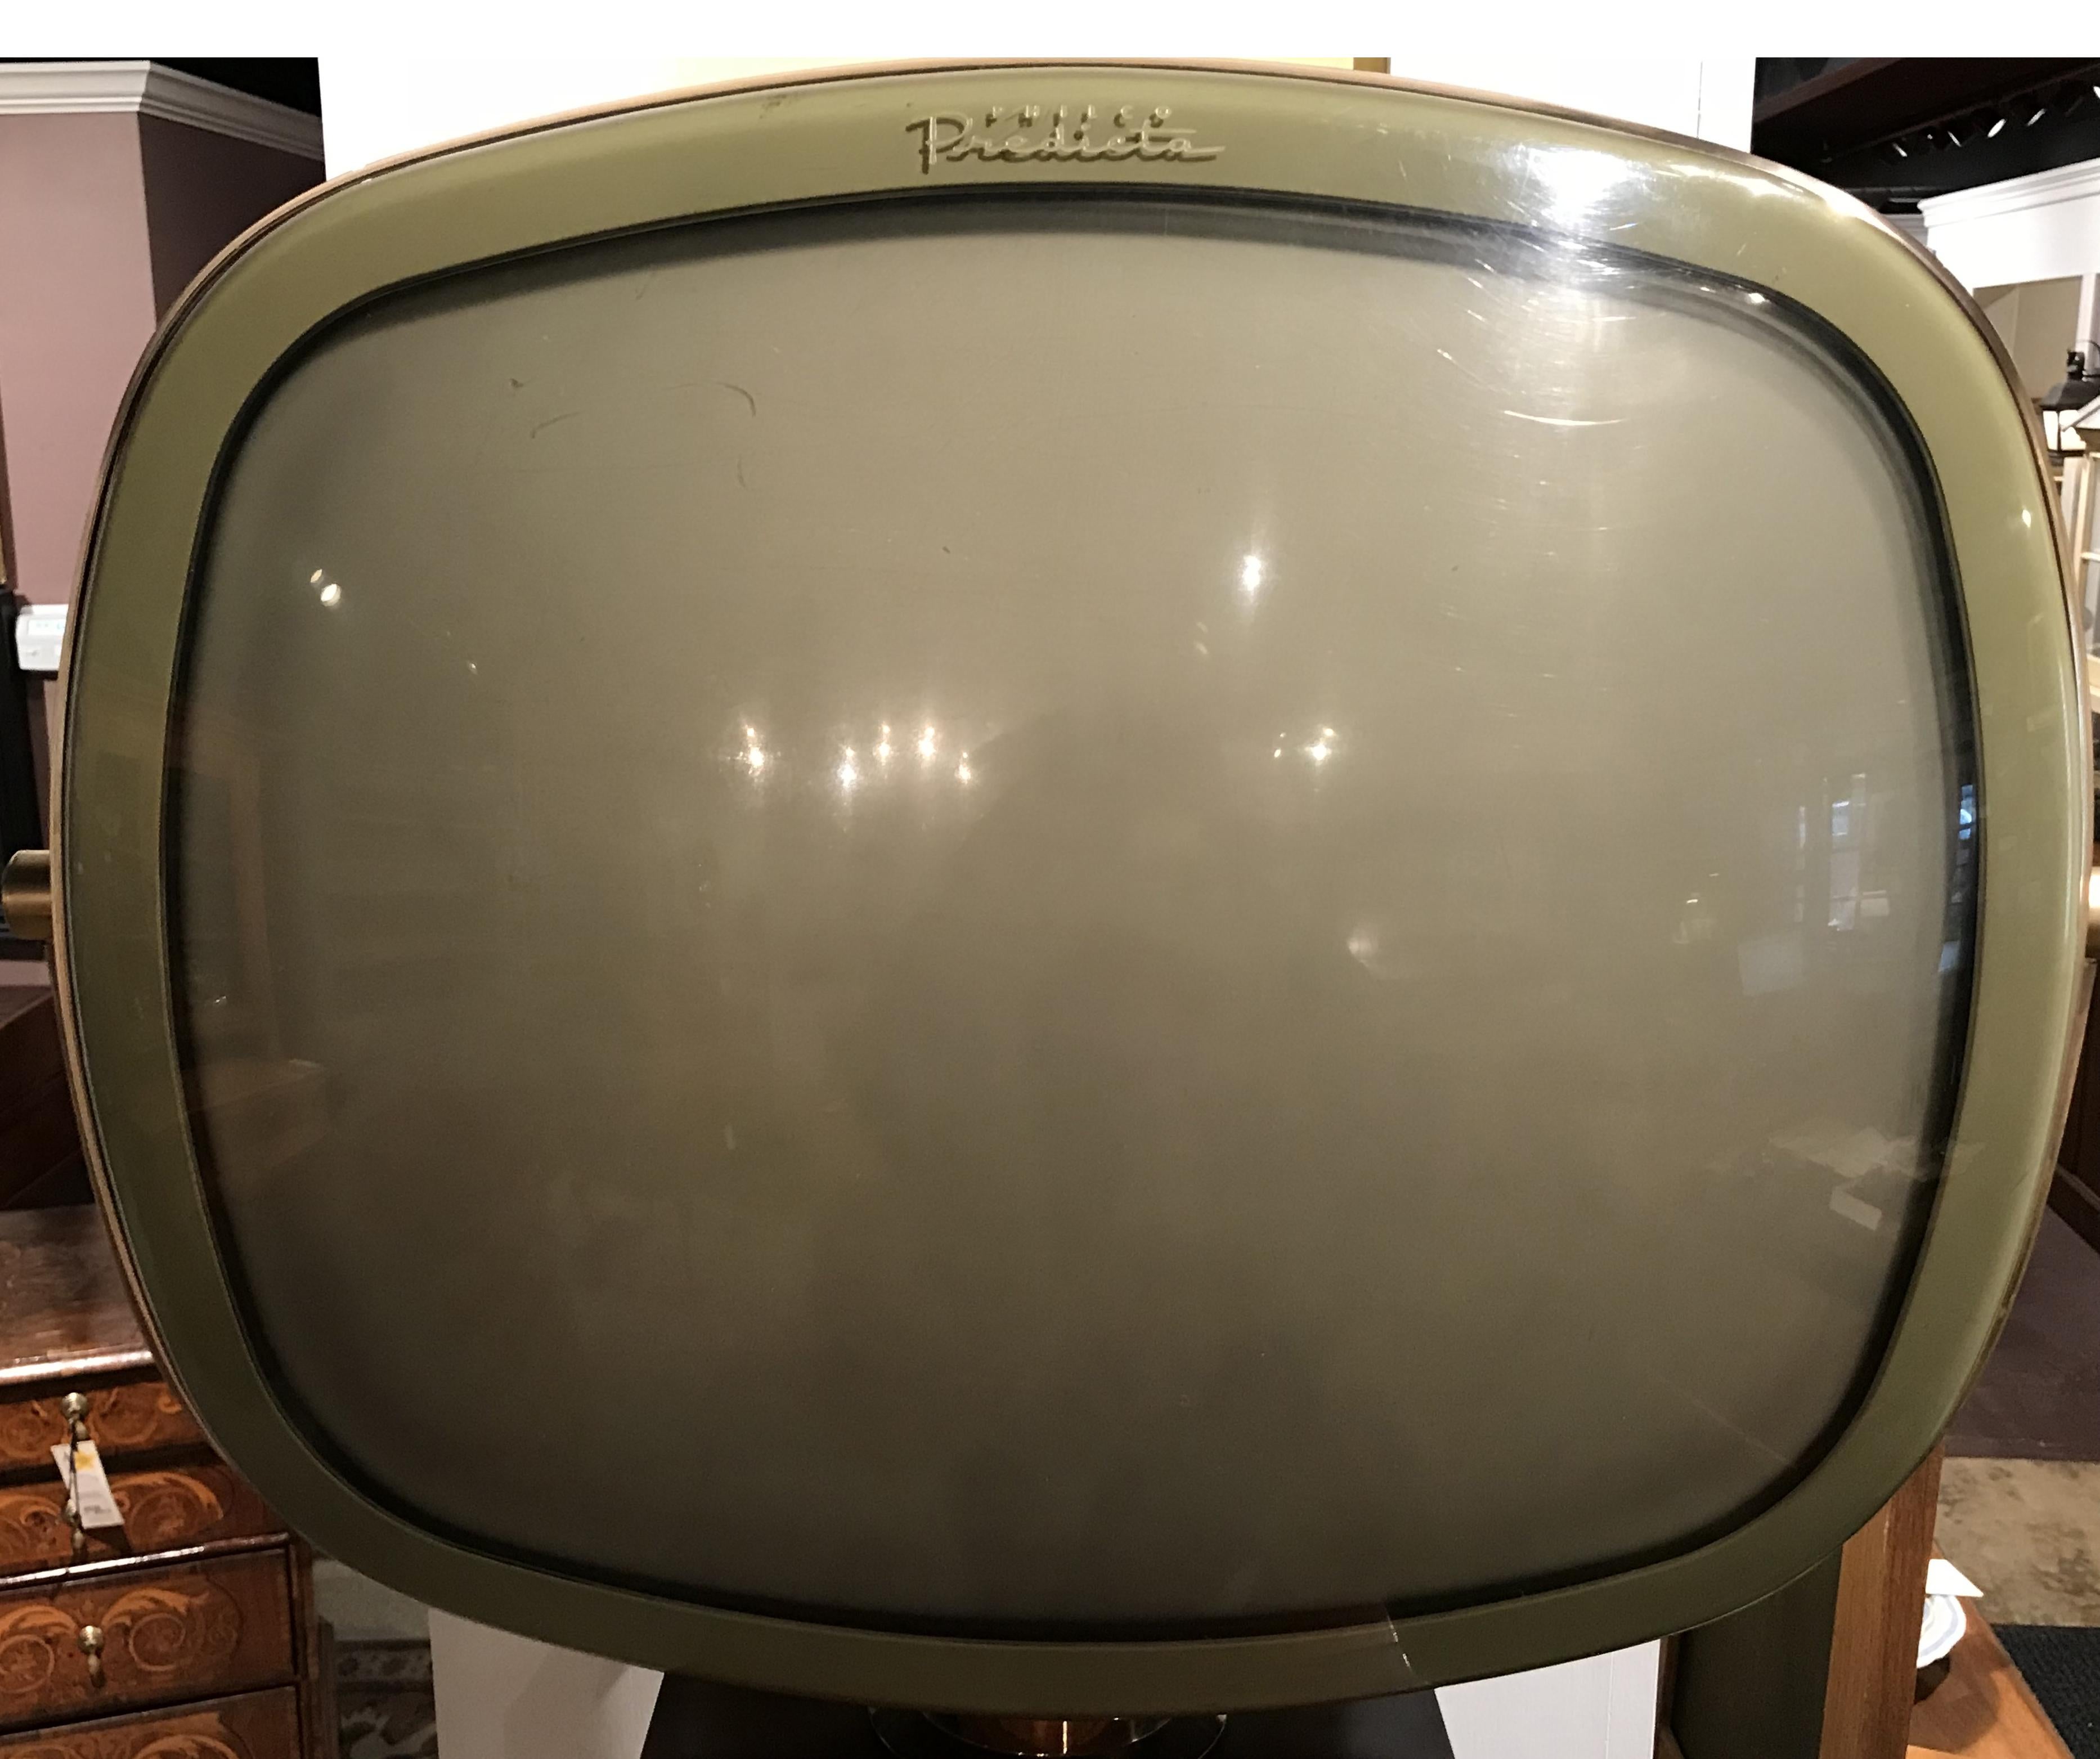 A rare exceptional example of a 1960 Philco Predicta Continental Model 4730 swivel screen television TV with a mahogany console, uniquely combining a Danish Modern and Space Age, Atomic look. It has a slim SF Philco 21 inch screen in safety case